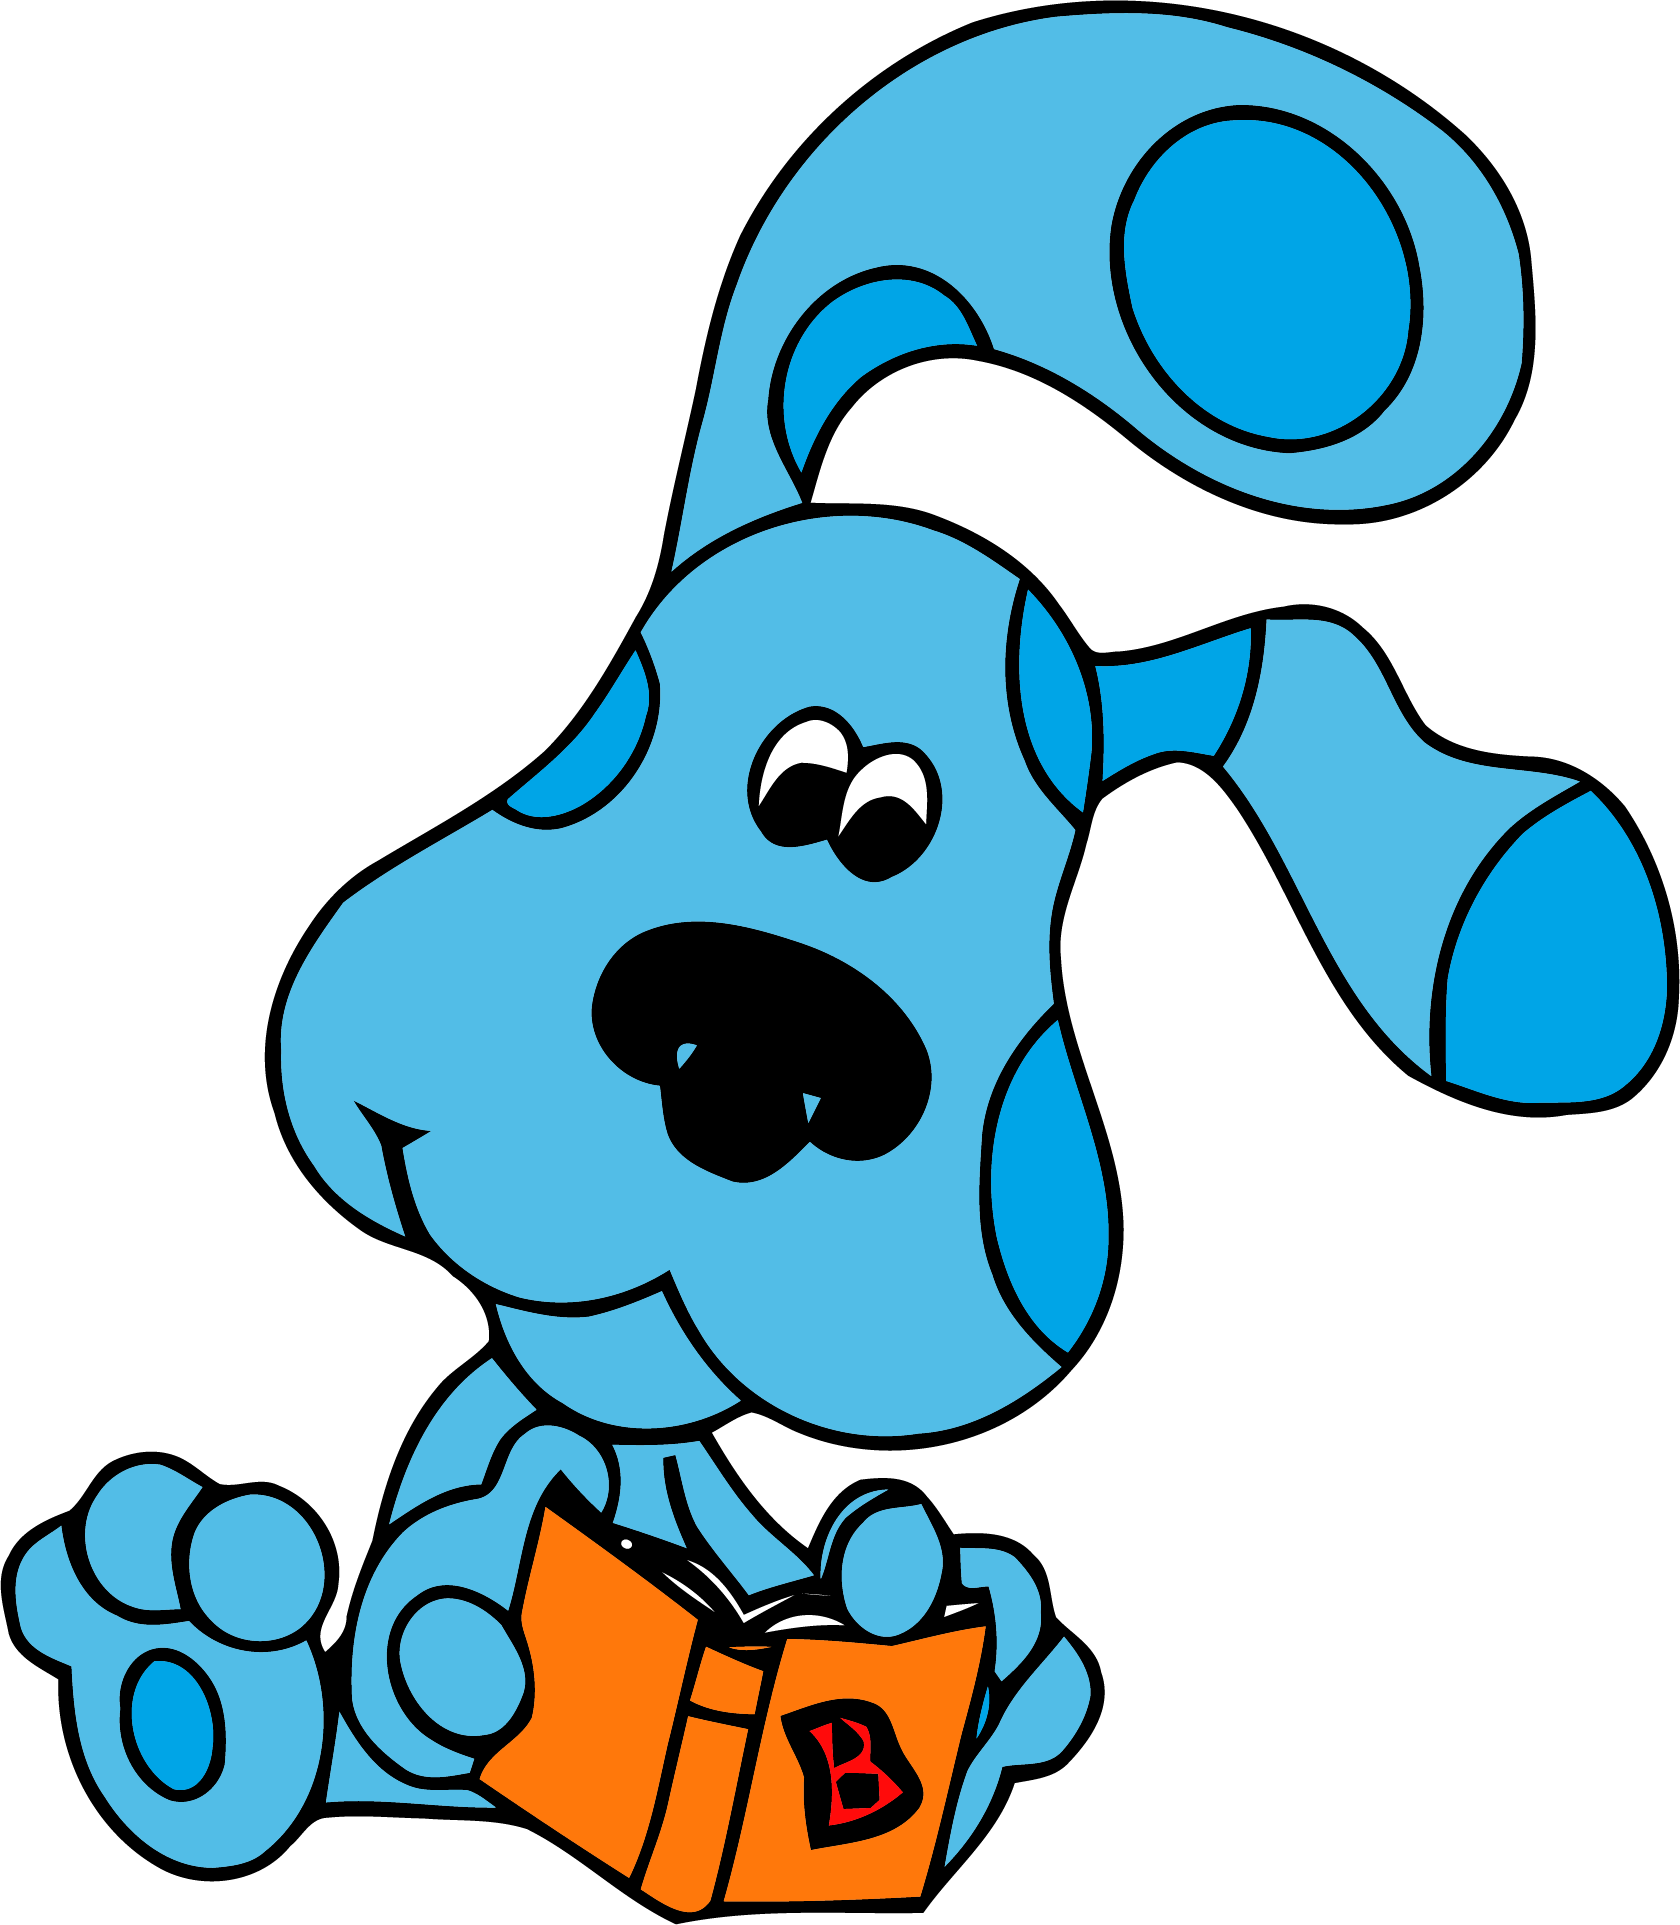 0 Result Images of Blues Clues Characters Png - PNG Image Collection